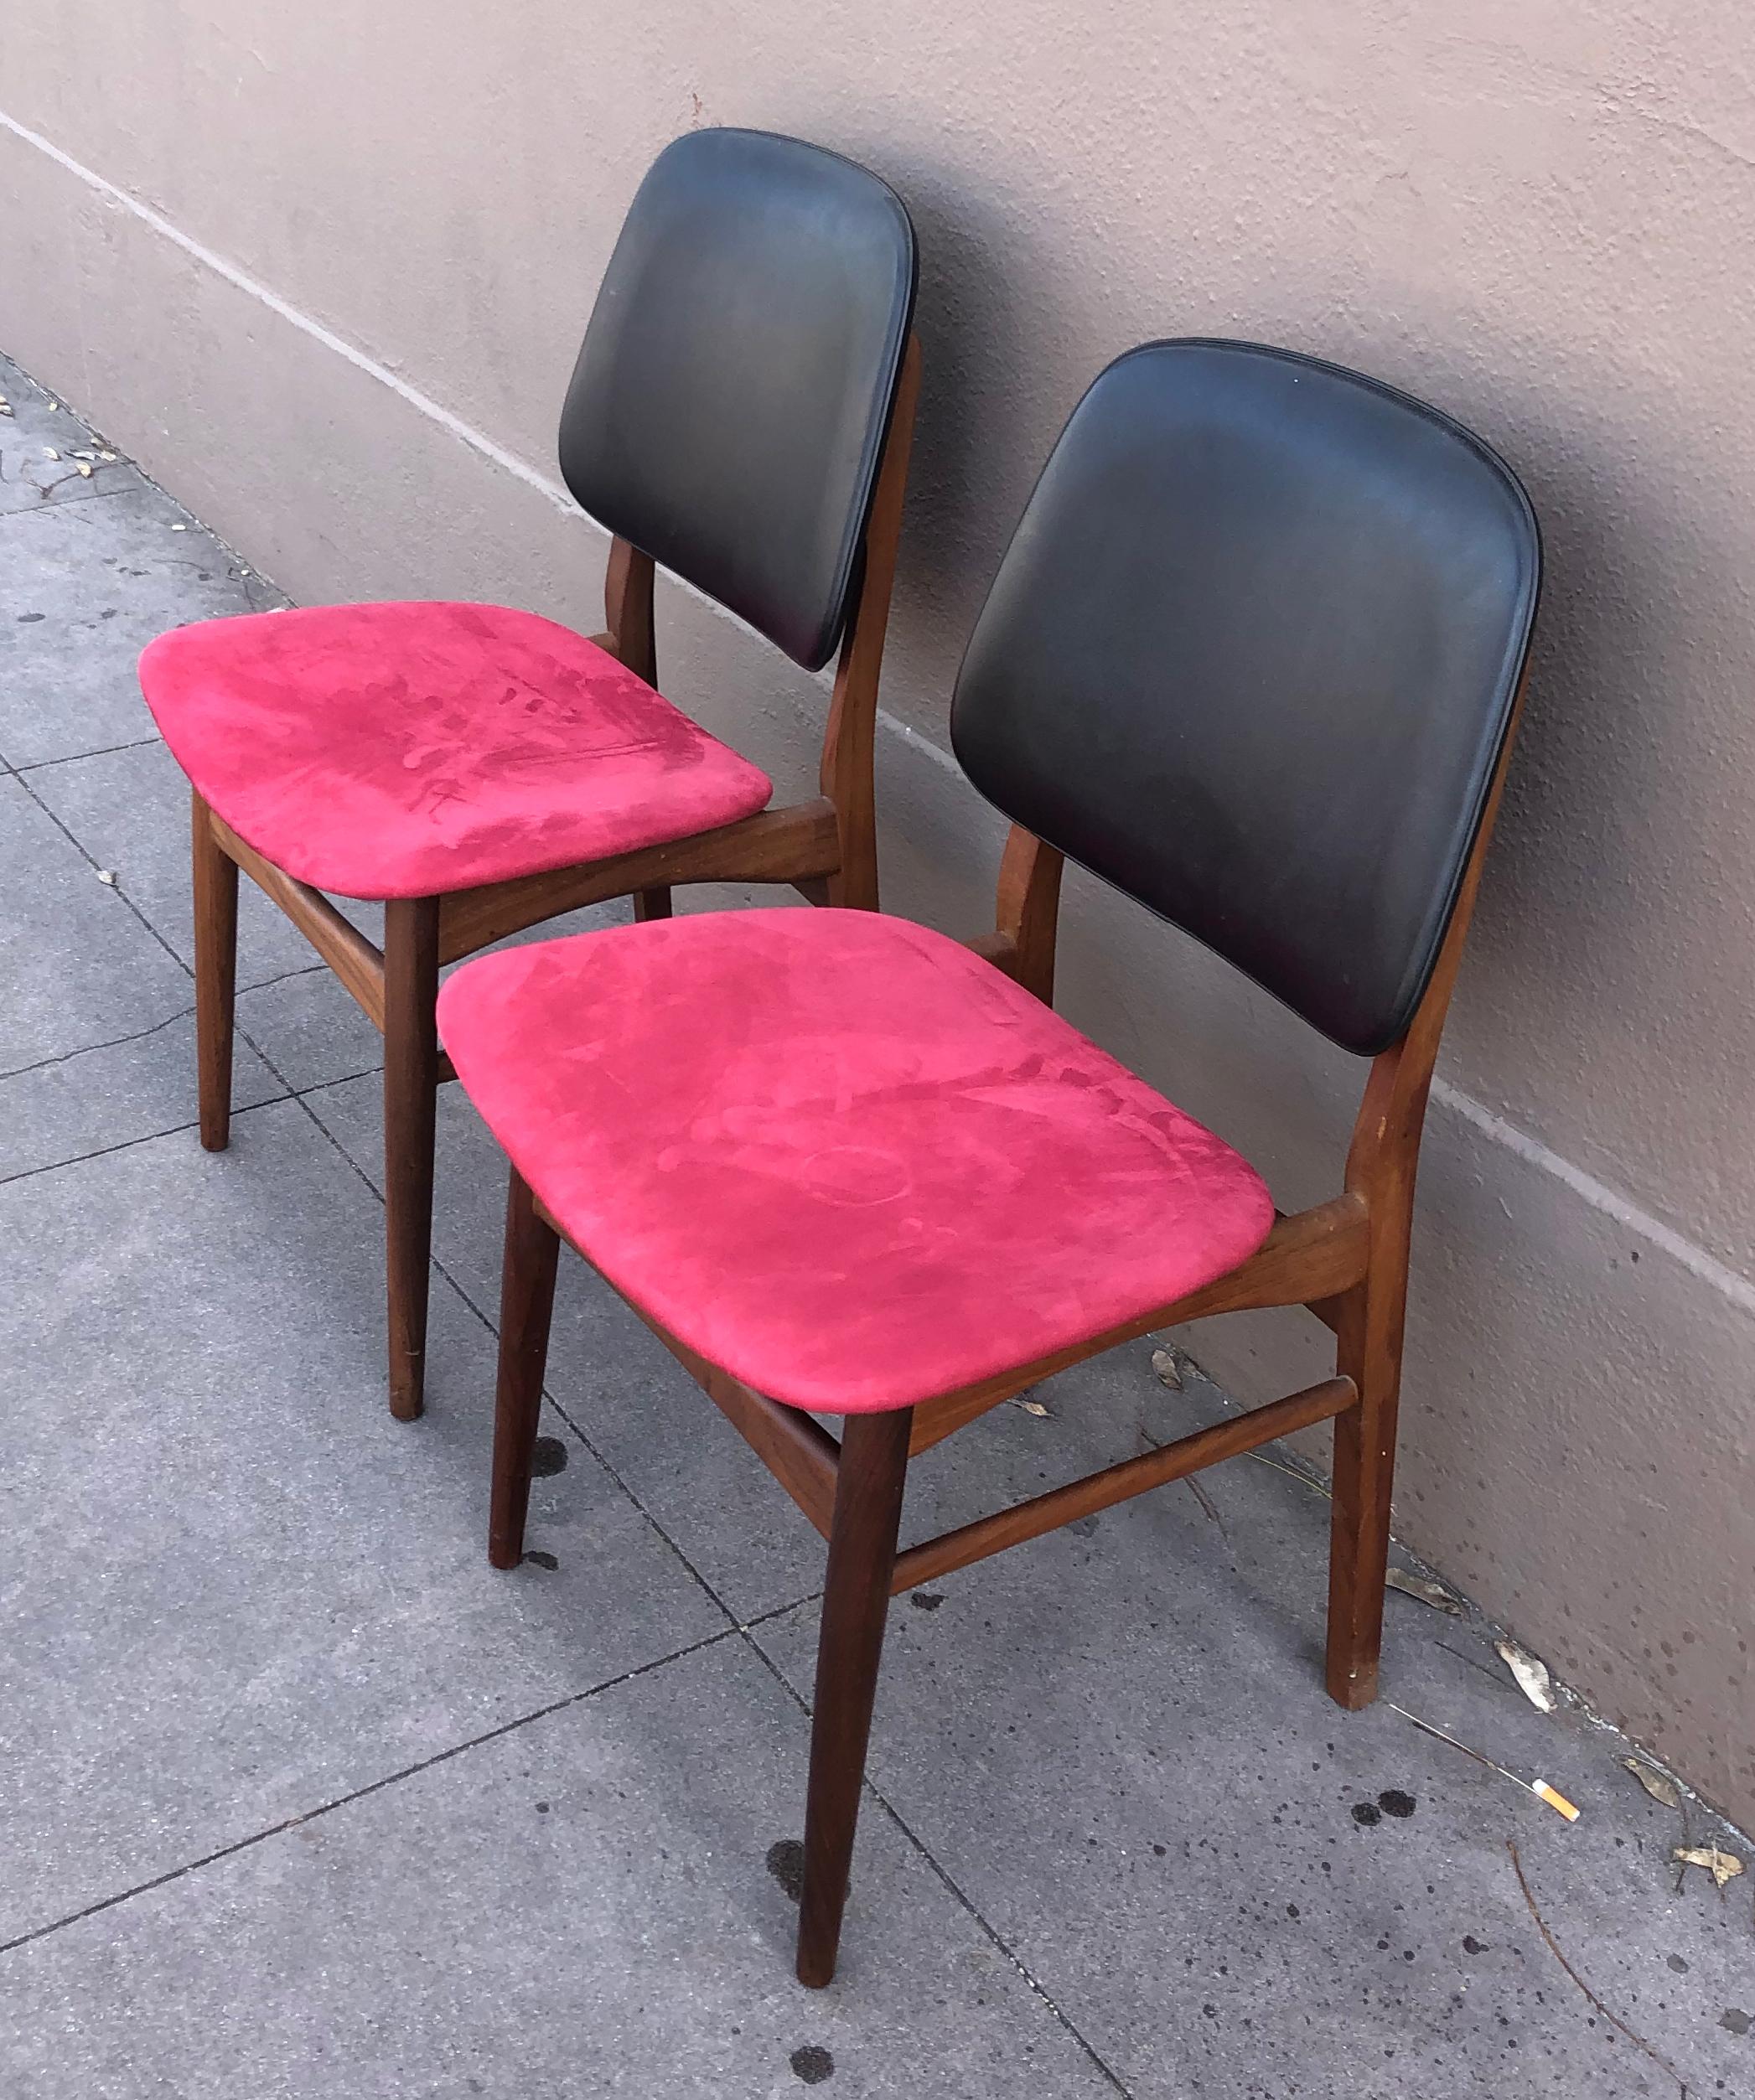 Mid-20th Century Midcentury Danish Colourful Chairs For Sale